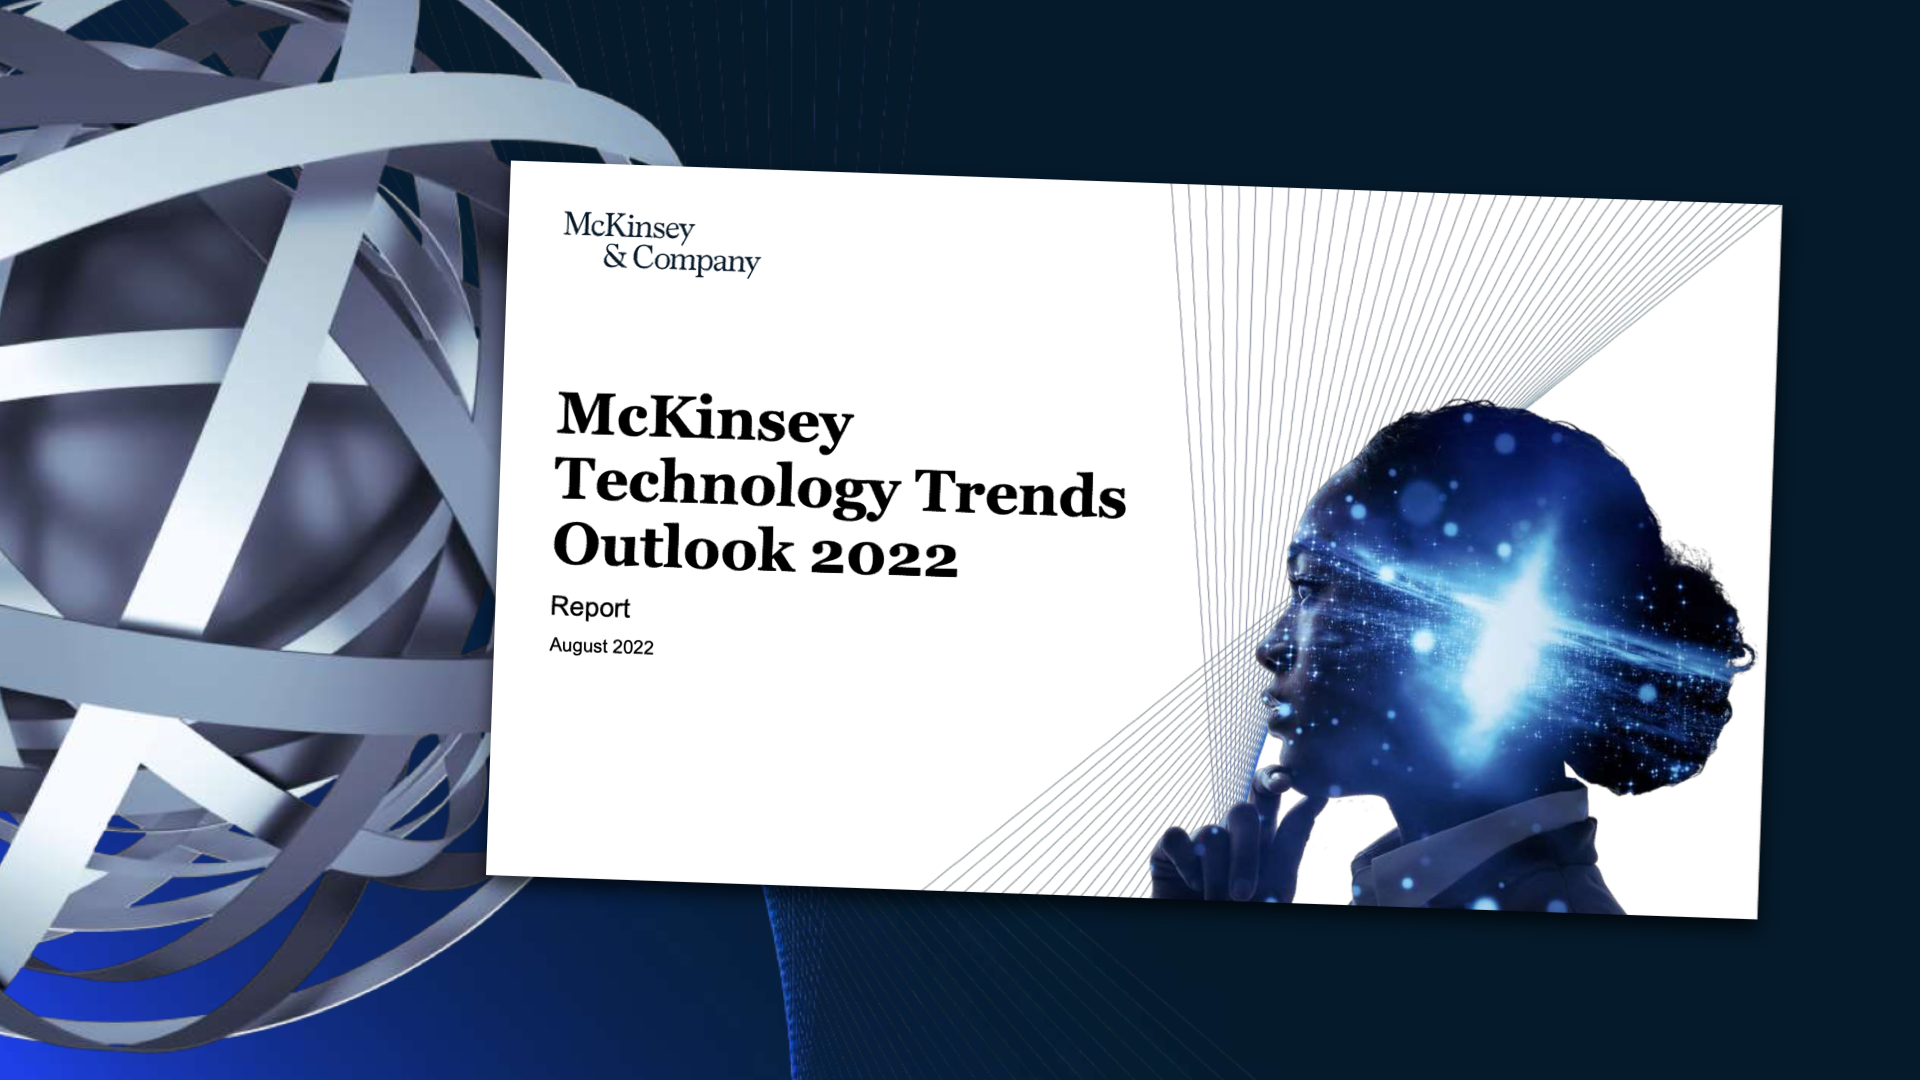 New McKinsey know-how report outlines key areas of alternative for media